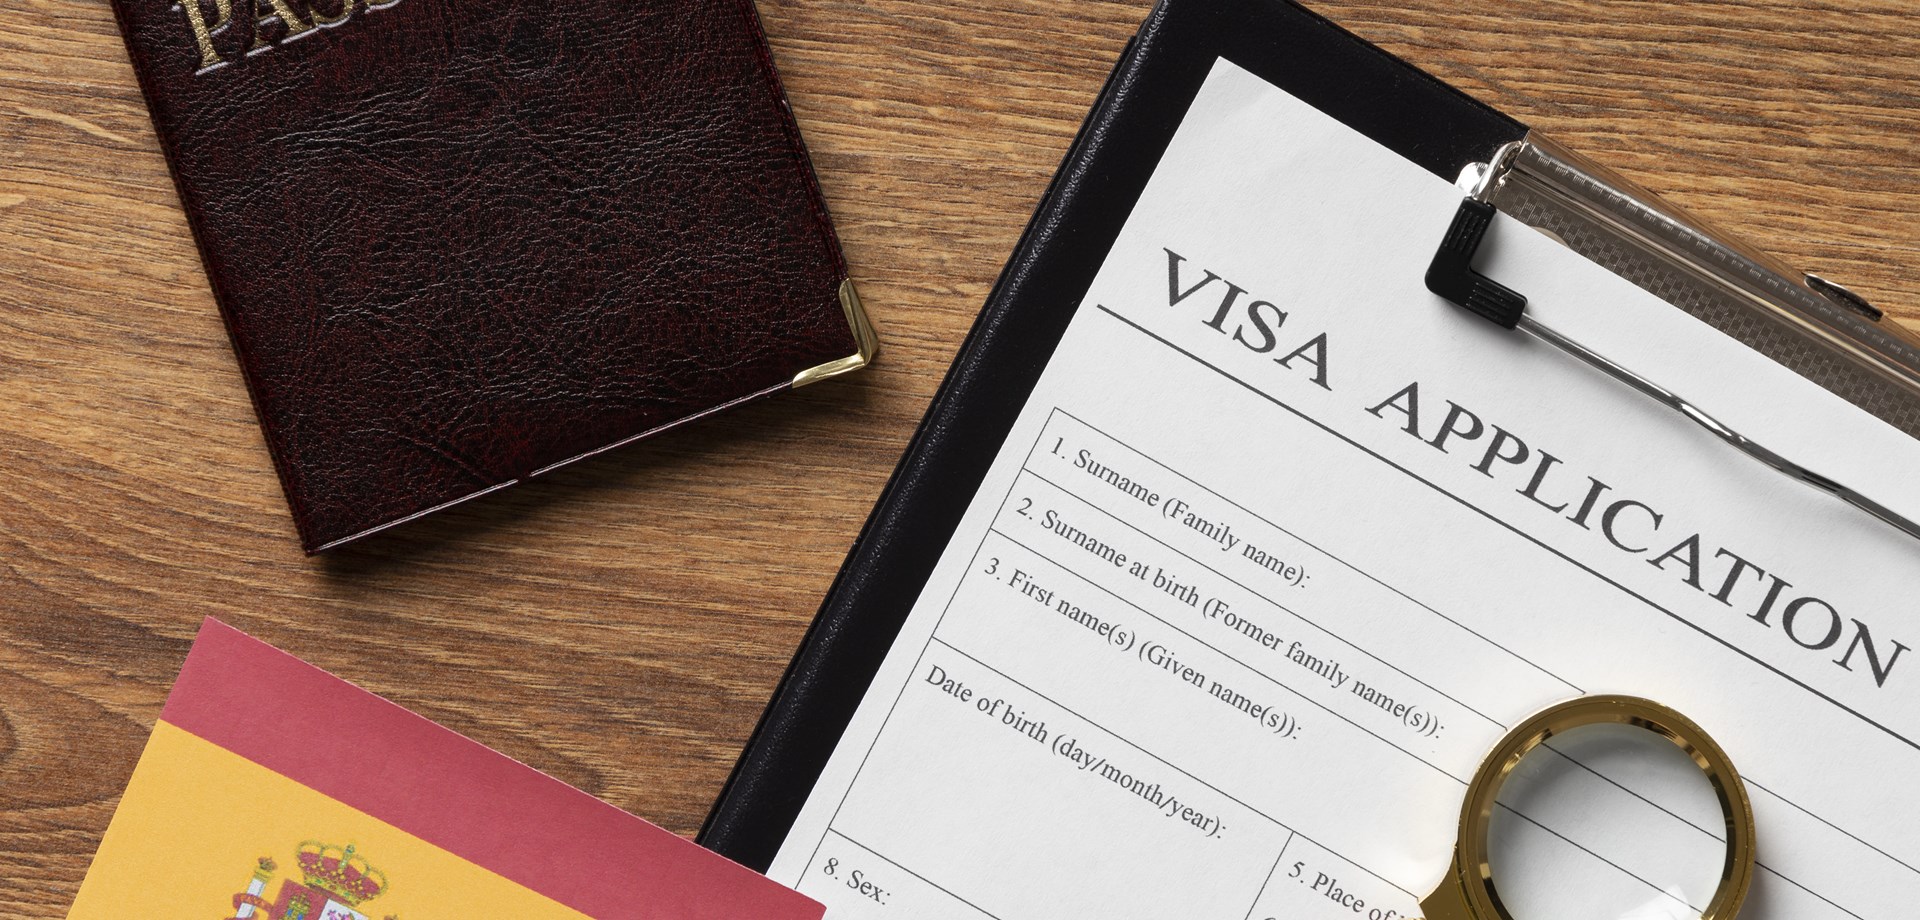 Golden Visa Spain: What is it and Requirements